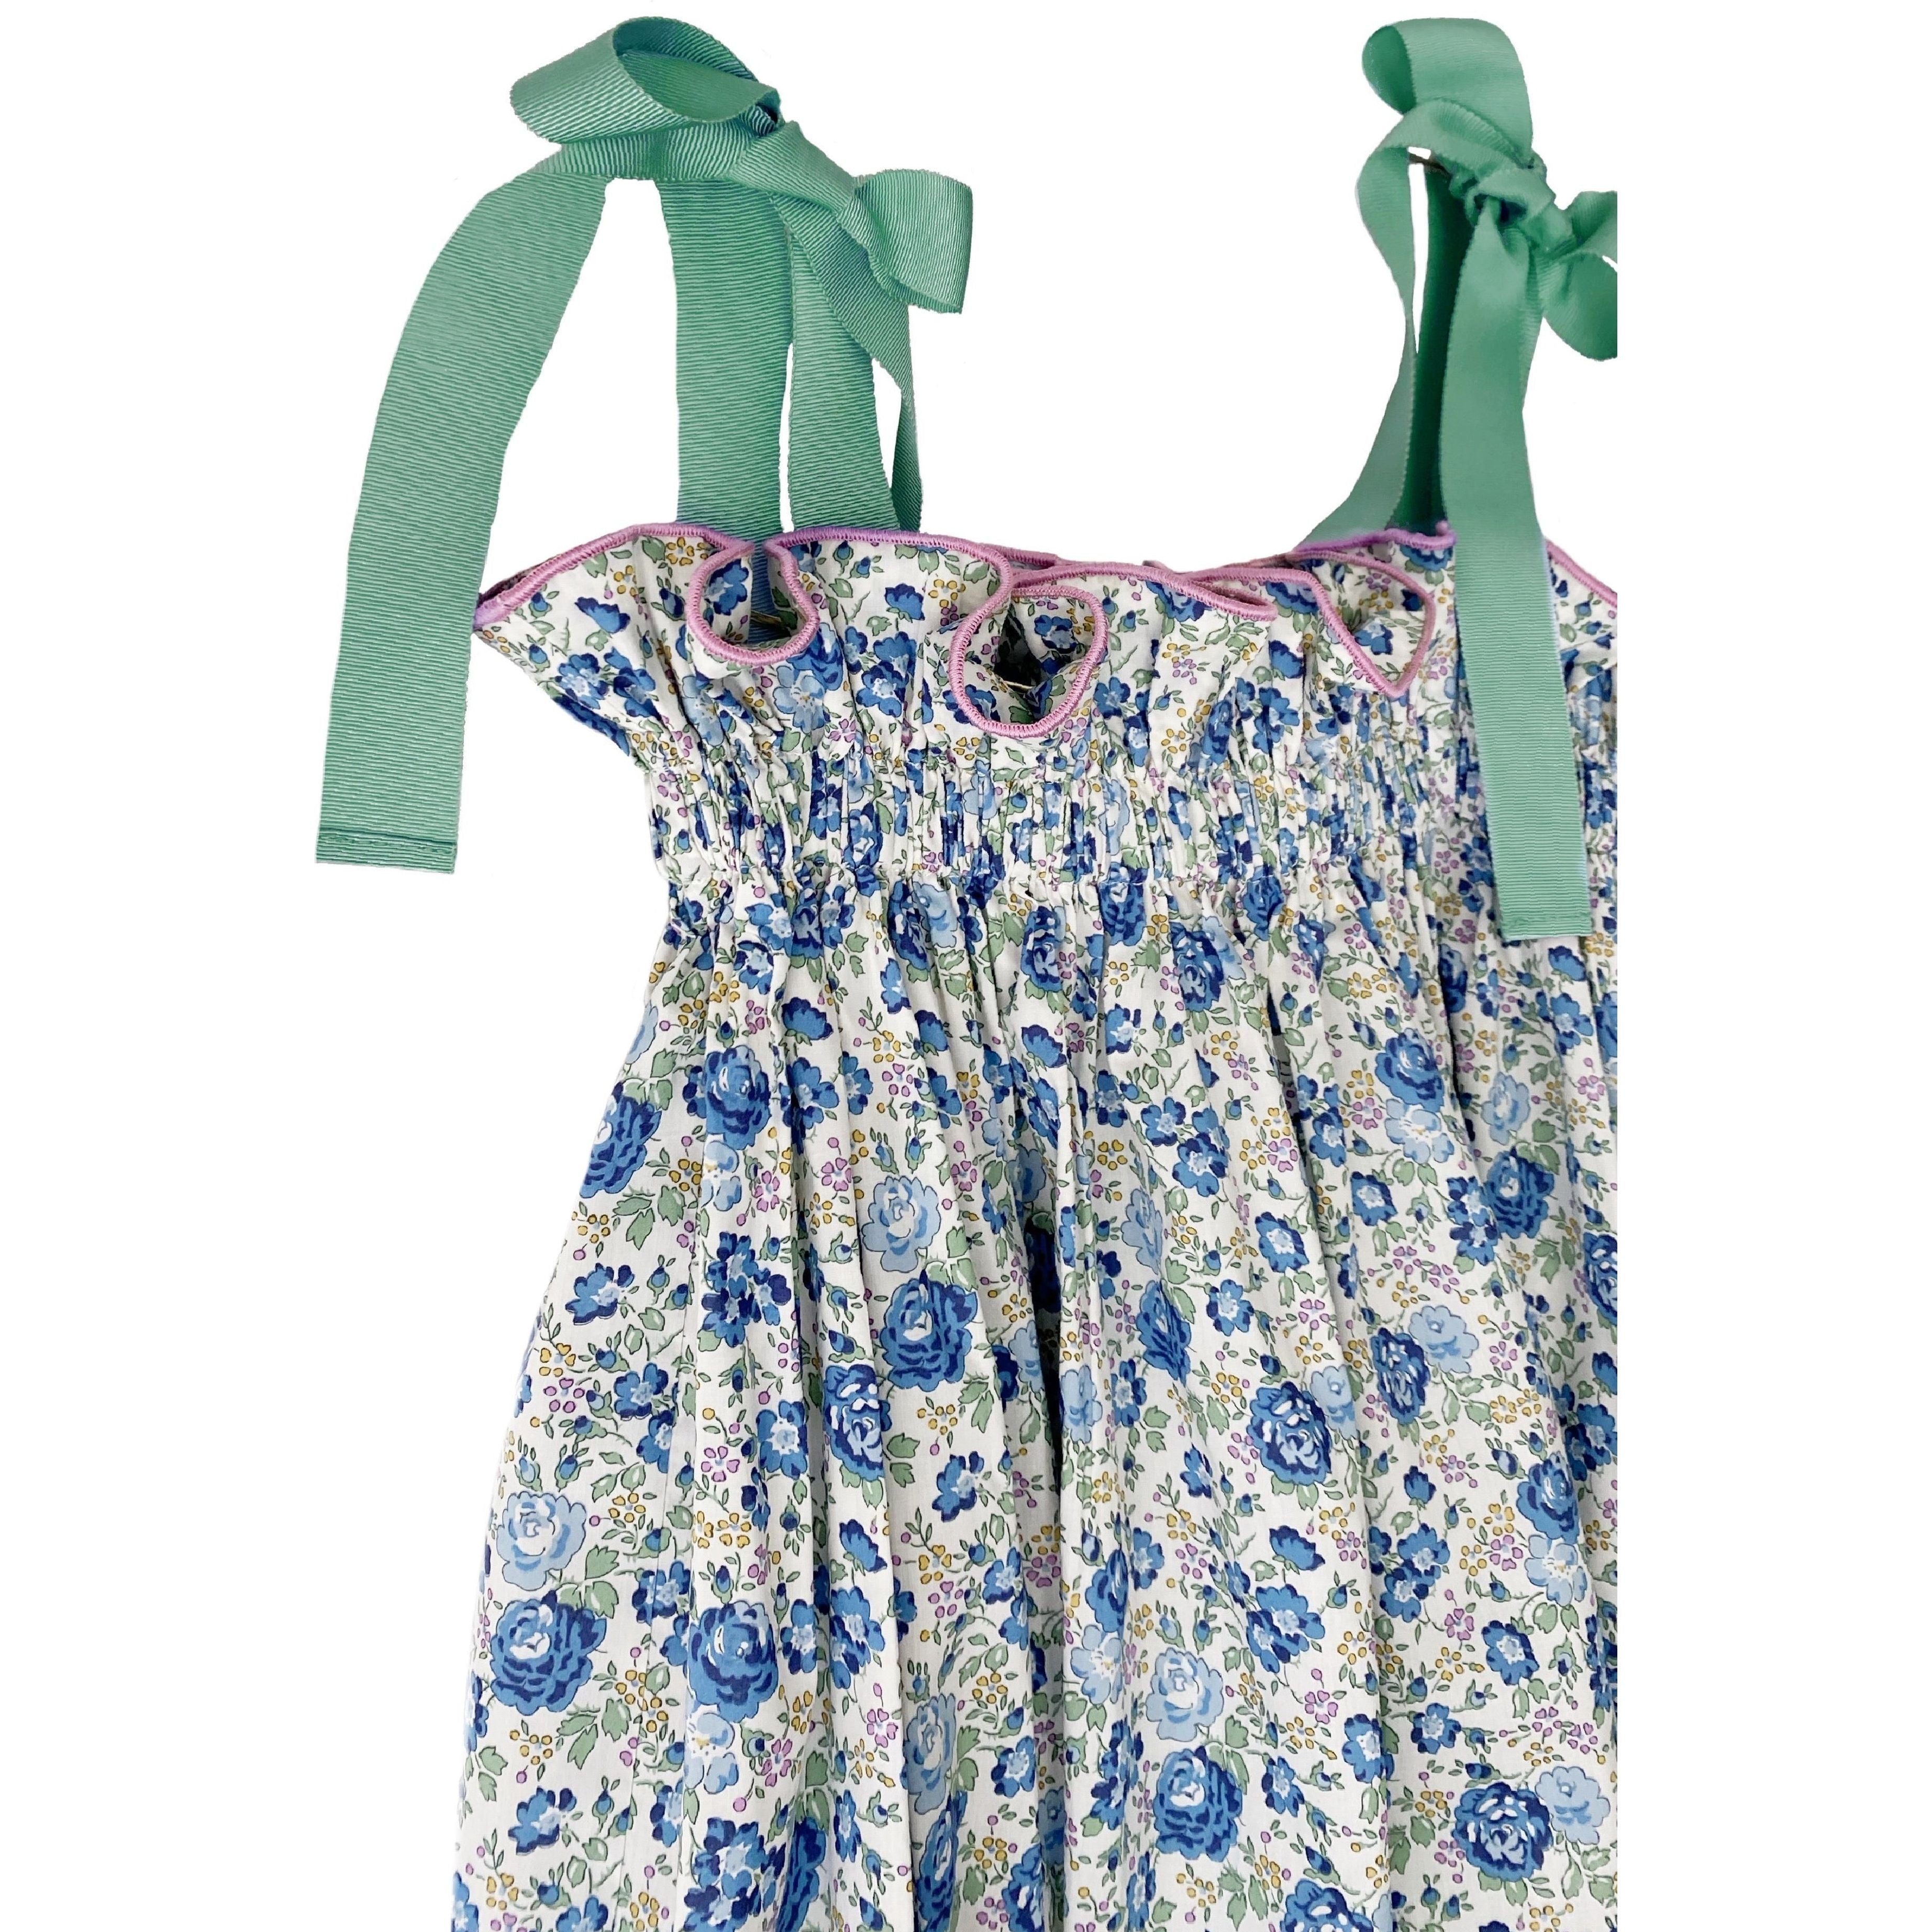 Girls' Jaime Dress in Blue Floral by Casey Marks